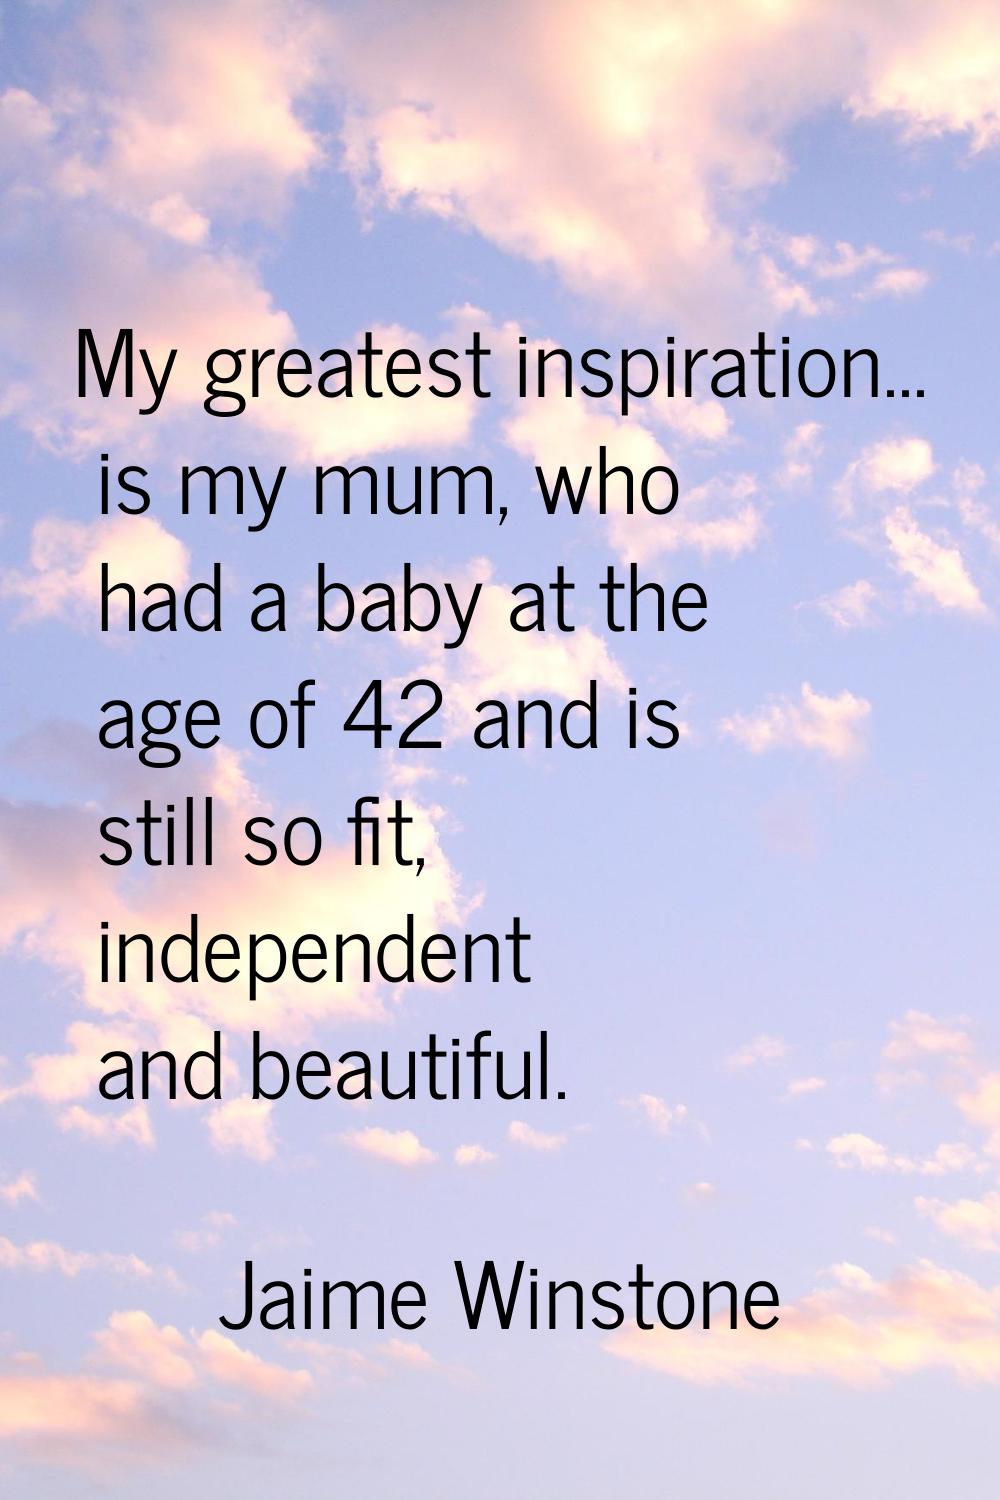 My greatest inspiration... is my mum, who had a baby at the age of 42 and is still so fit, independ